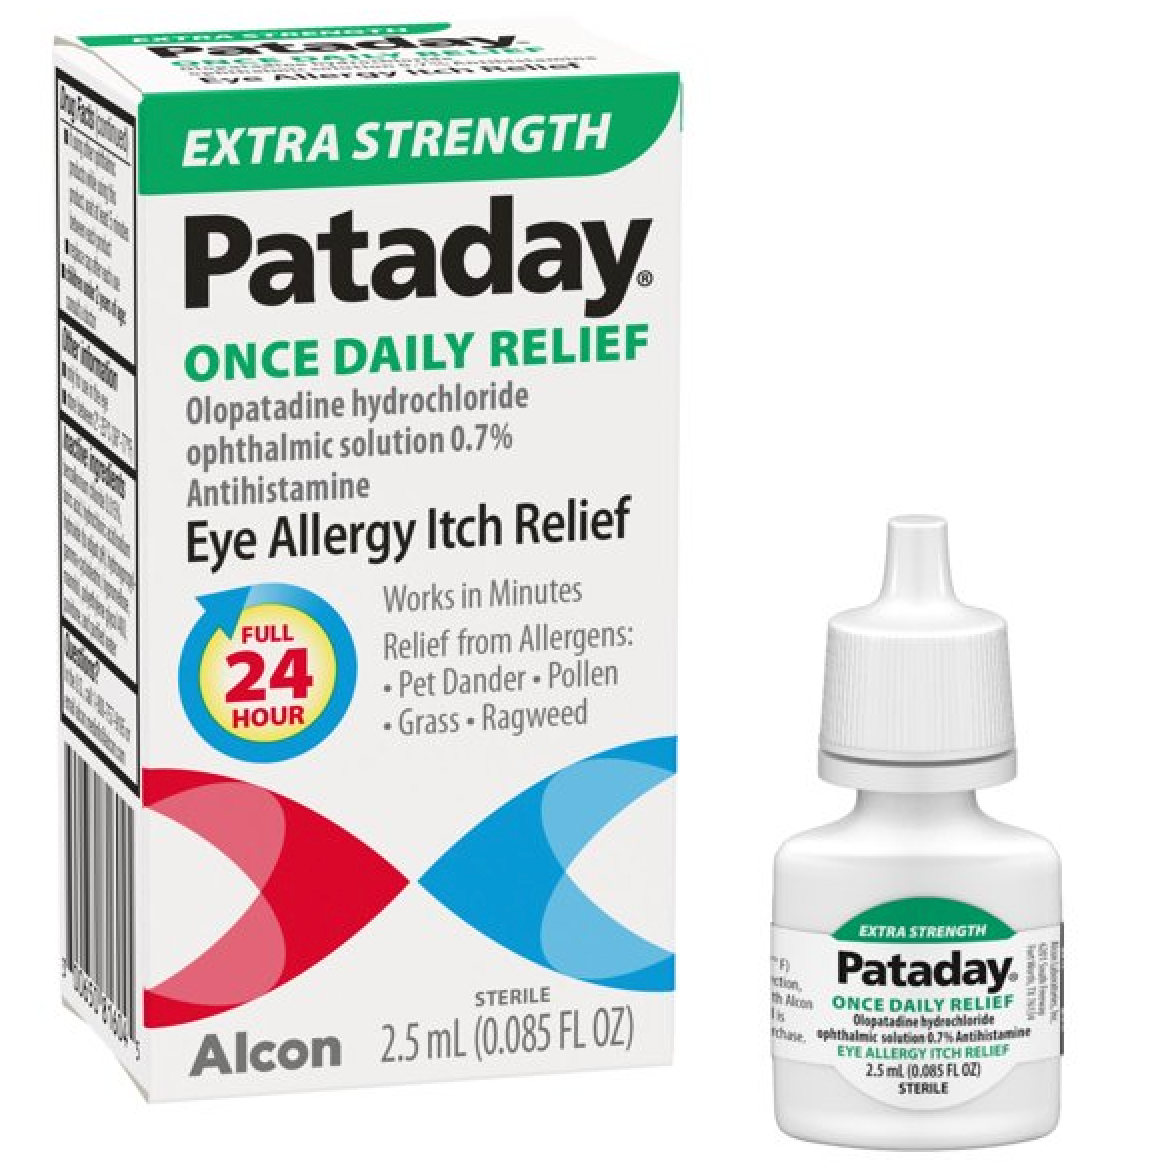 Alcon's Pataday Once Daily Relief Extra Strength